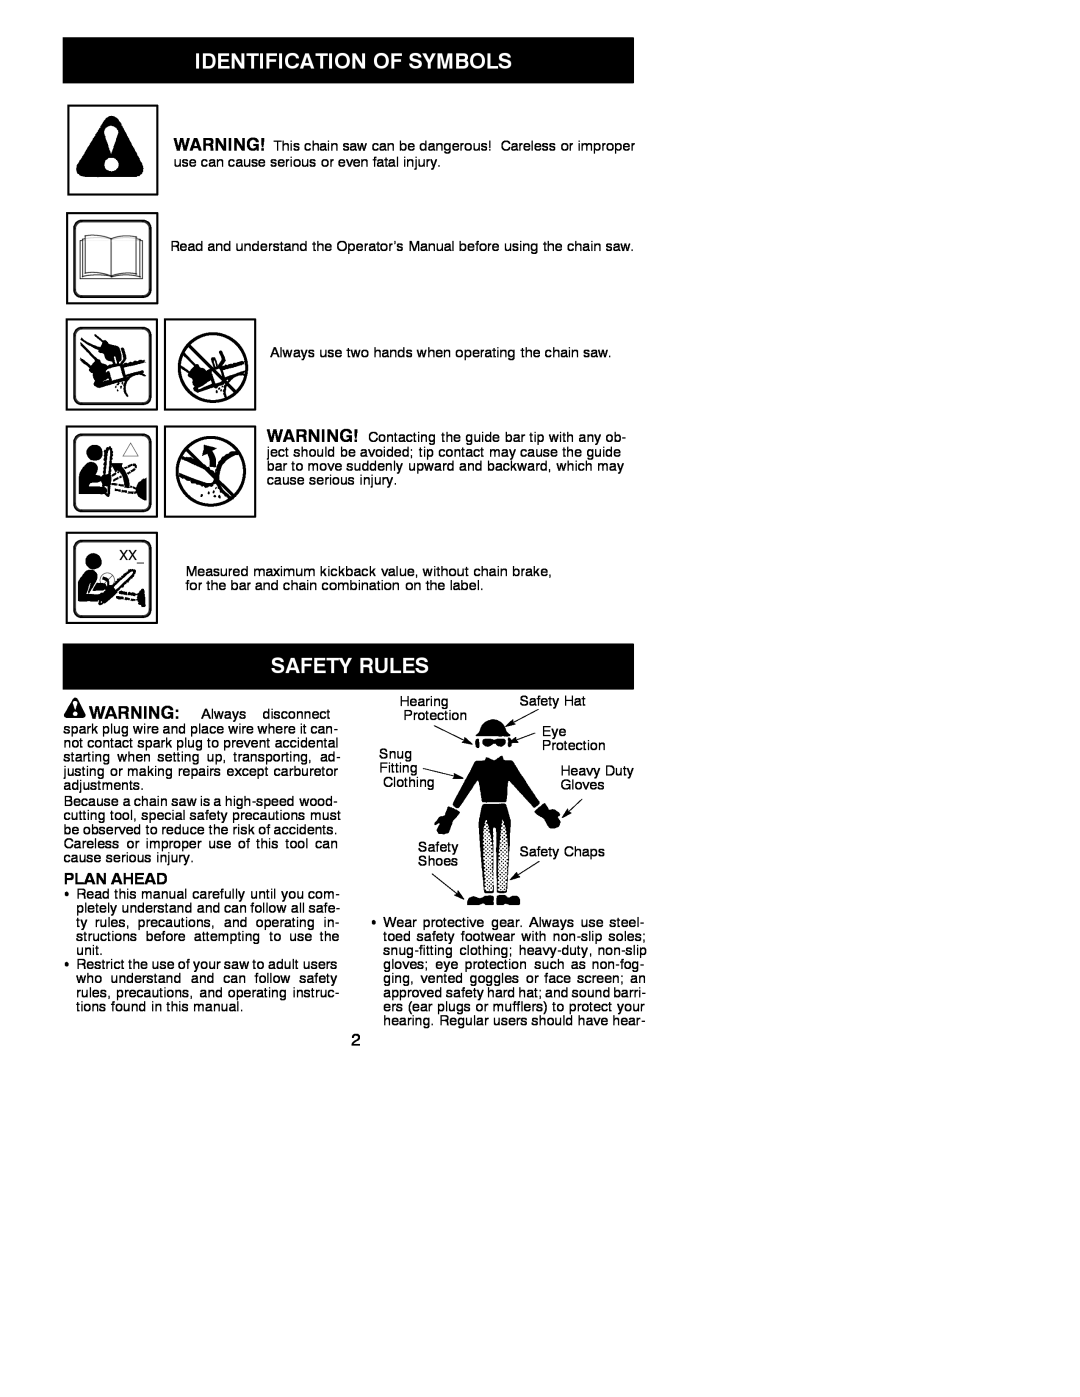 White-Westinghouse 330 manual Plan Ahead, Always use two hands when operating the chain saw, Safety Hat, Safety Chaps 